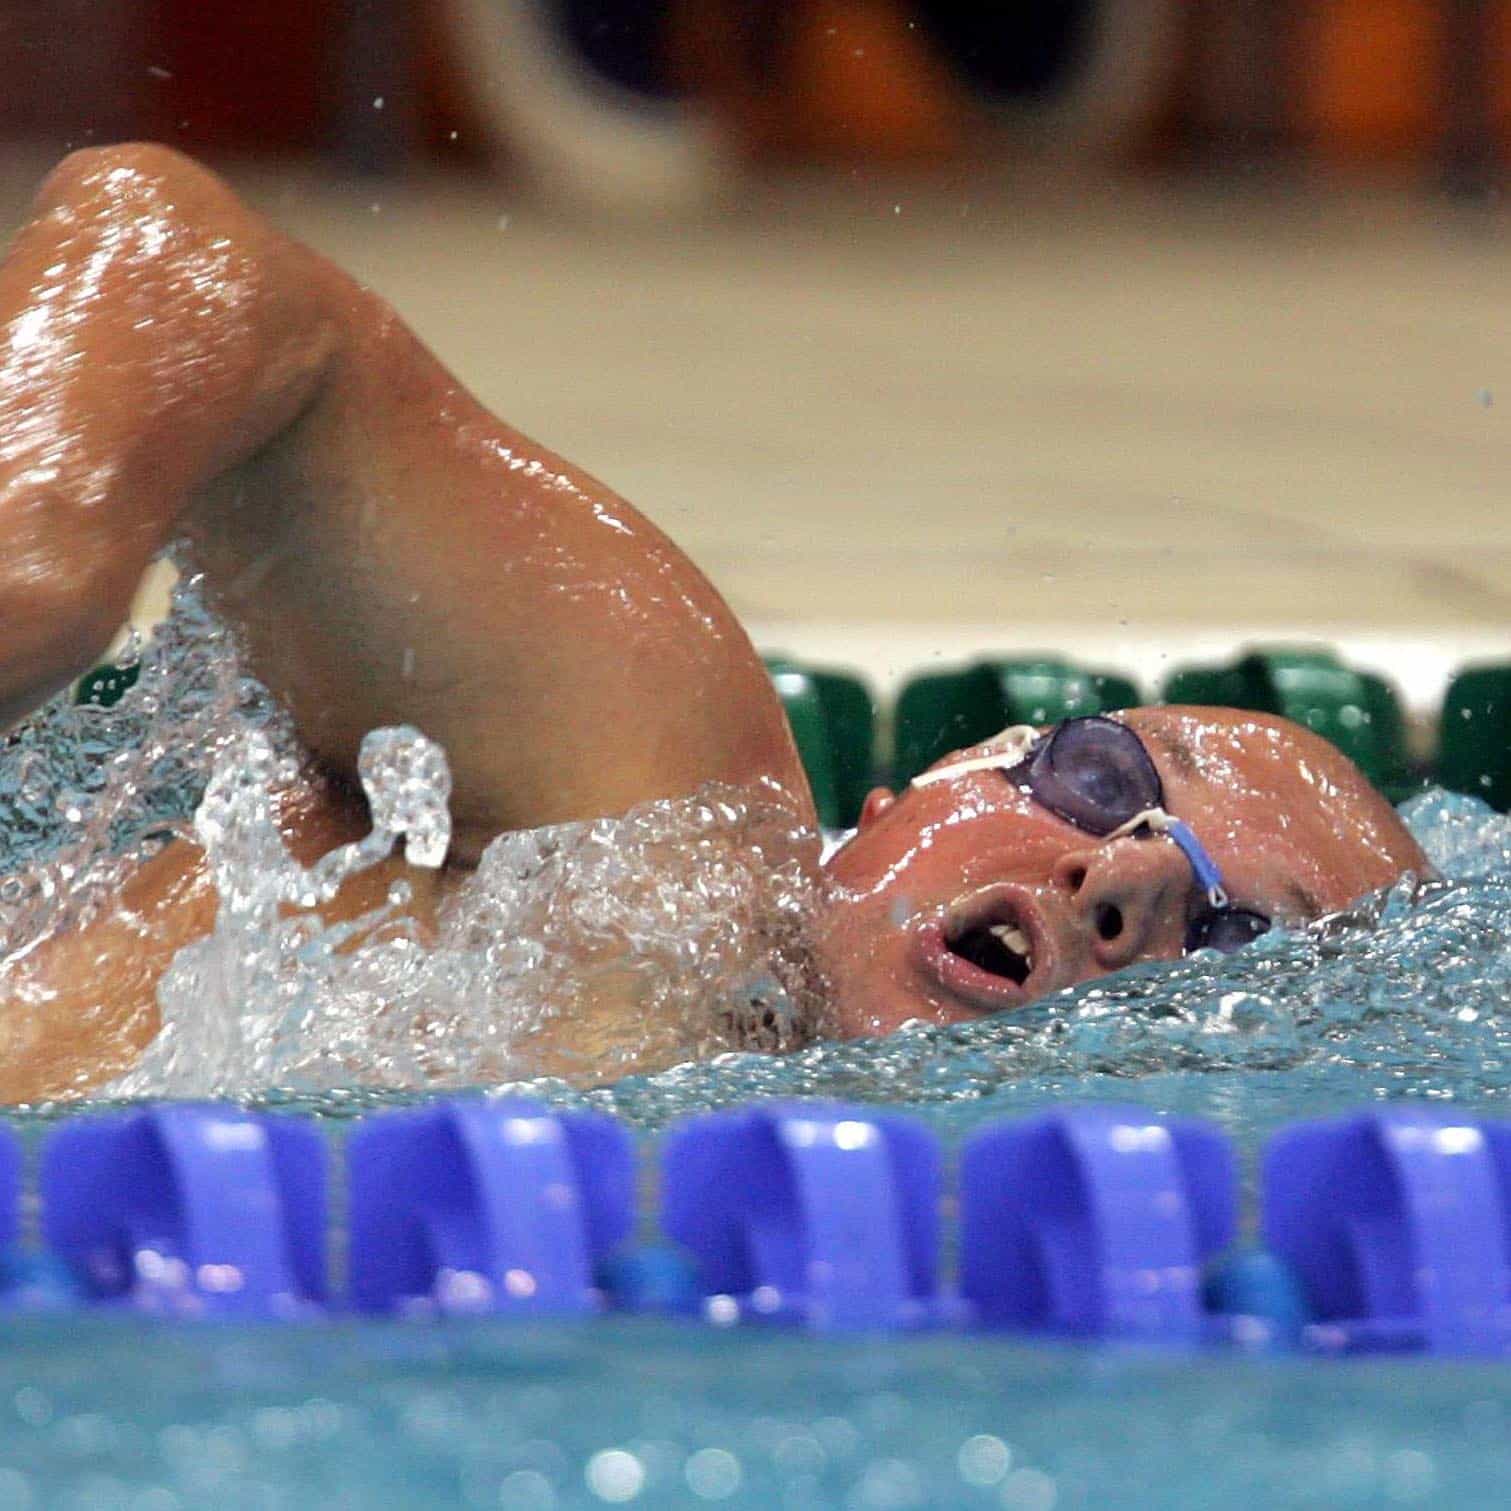 Hadleigh Pierson competes in the Men's S6 400m Freestyle Final at the Olympic Aquatic Centre, Athens, Greece on Sunday 26 September, 2004. Pierson finished 8th with a time of 5:44:09 minutes.
PHOTO: Hannah Johnston/PHOTOSPORT